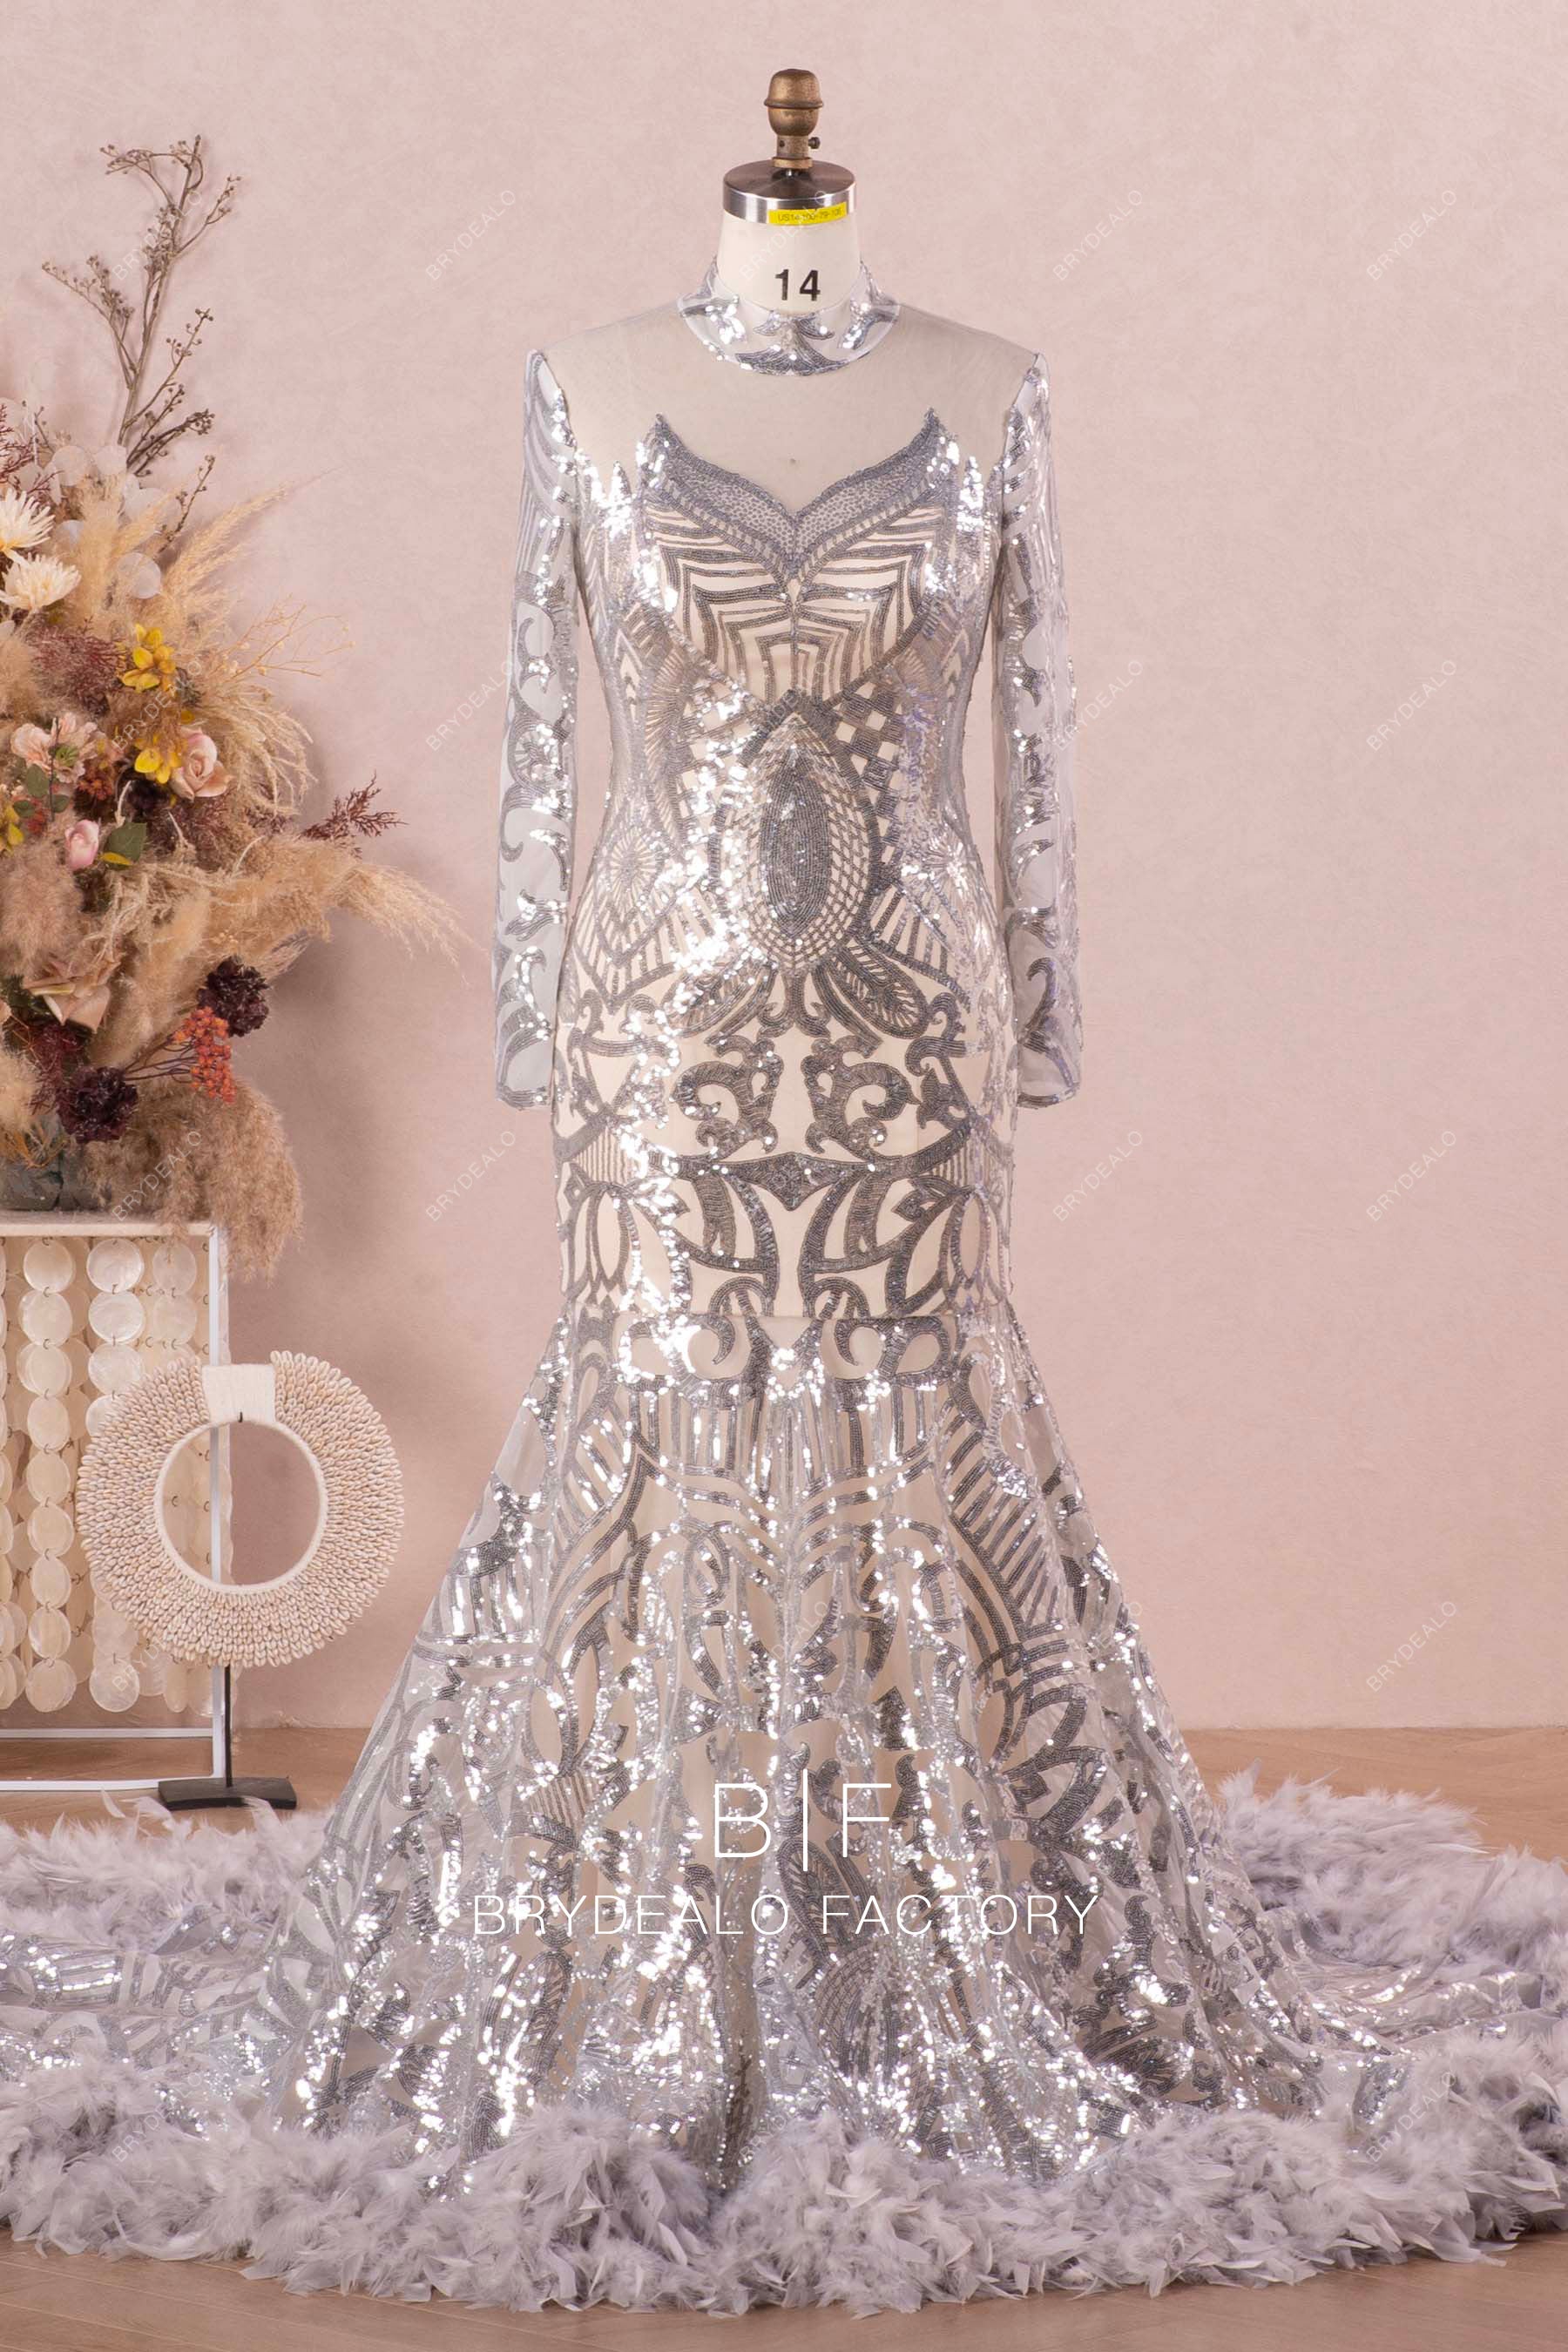 sparkly sleeved high neck patterned sequin mermaid prom dress